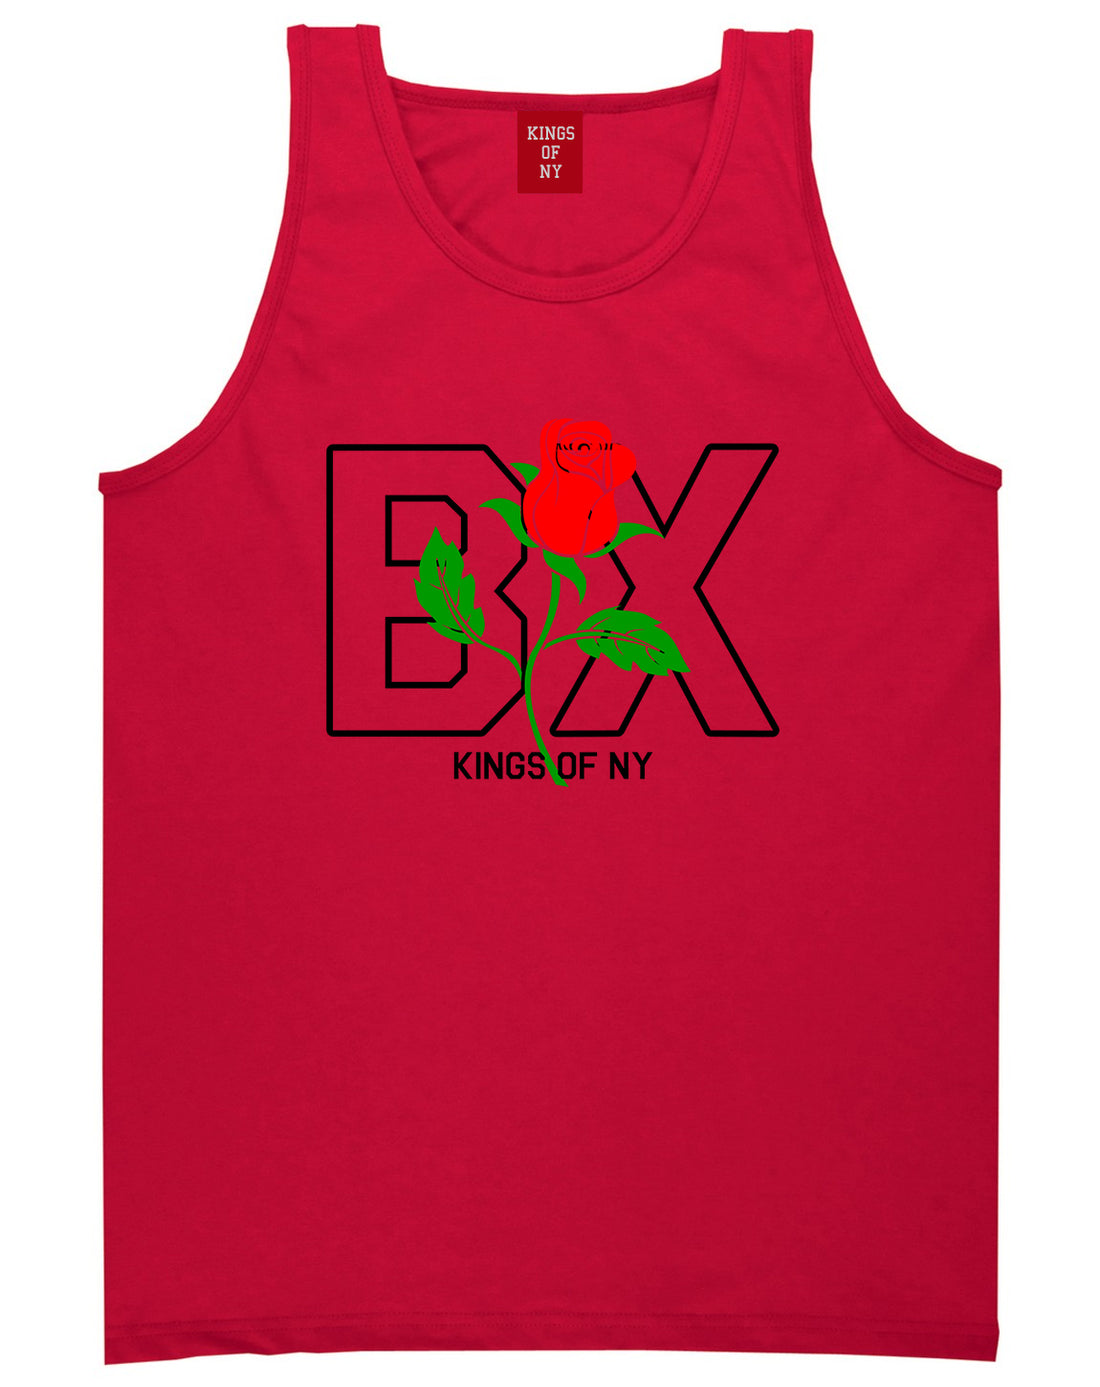 Rose BX The Bronx Kings Of NY Mens Tank Top T-Shirt Red